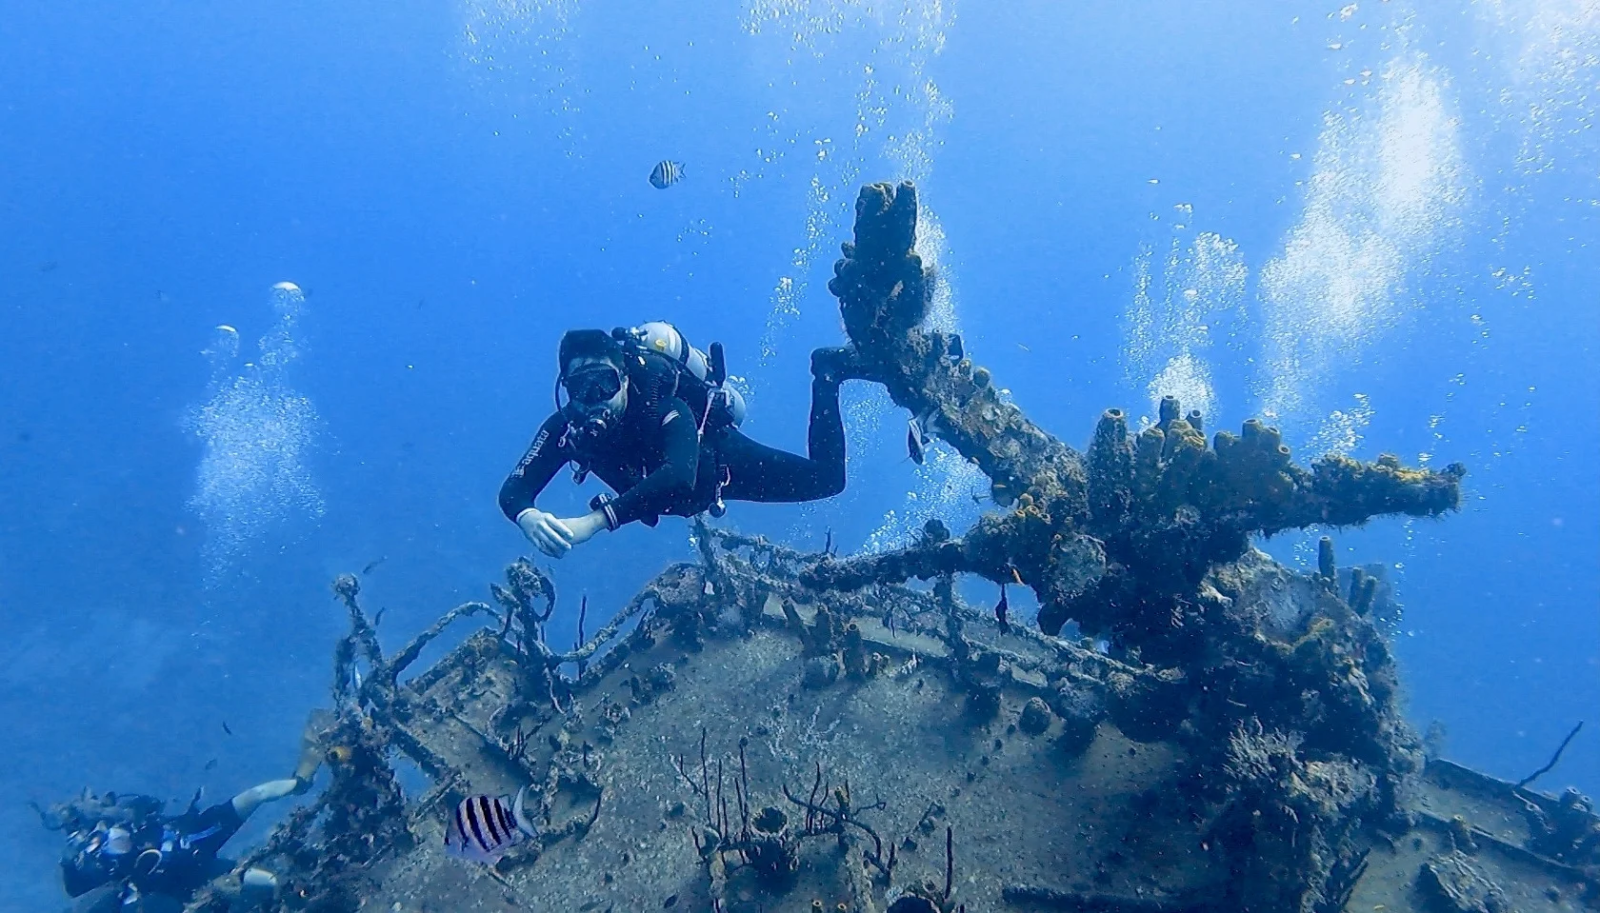 Scuba diving in Bayahibe. St. George wreck ship